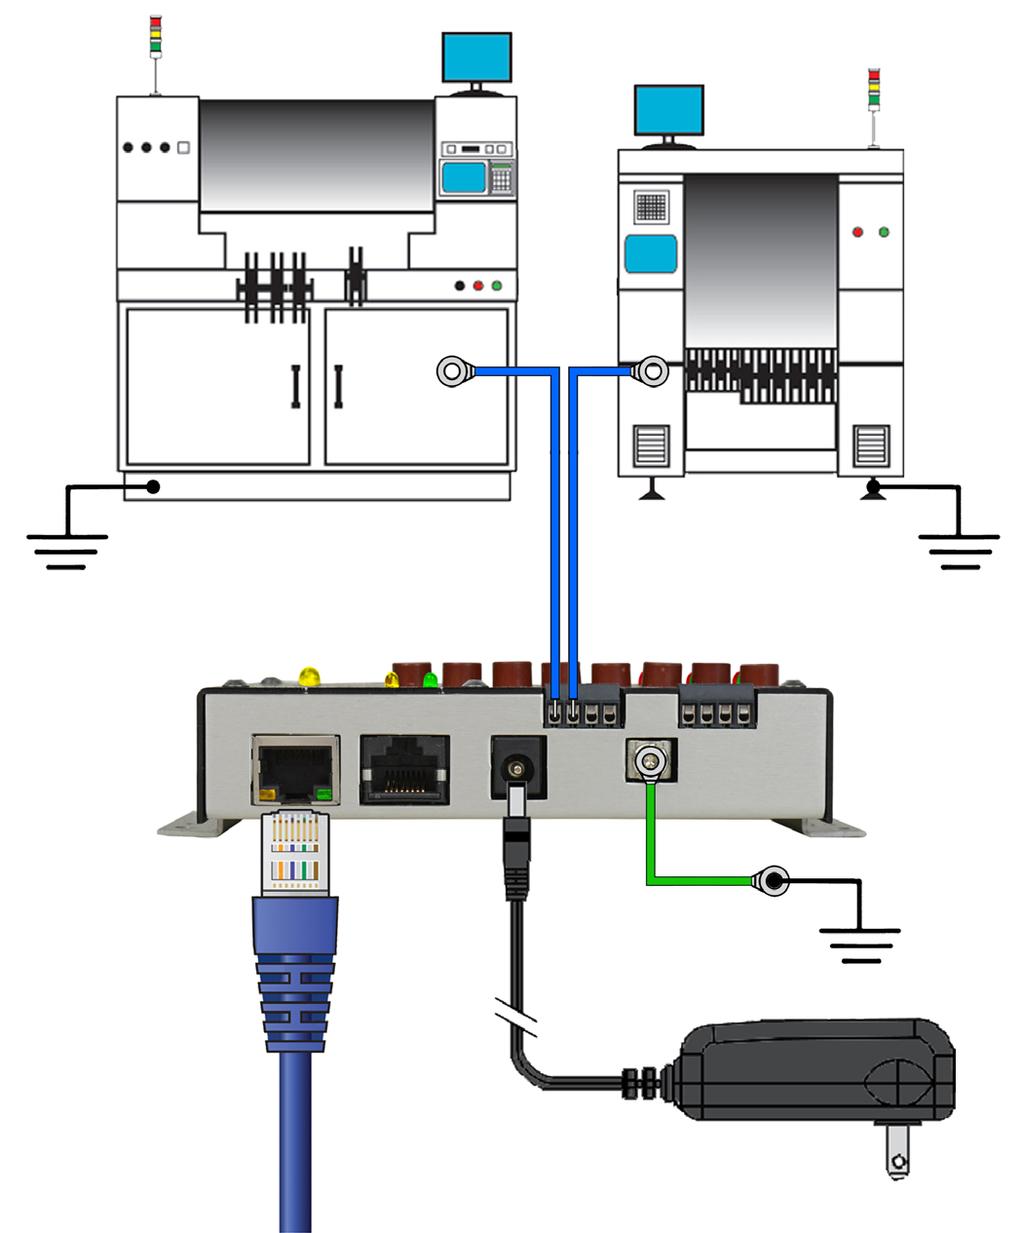 K. Relay Terminal: Integrates with electronic tools, lights, buzzers, etc. L. Power Jack: Connect the included 7.5VDC power adapter here. M. Ground Terminal: Common ground point for the monitor.